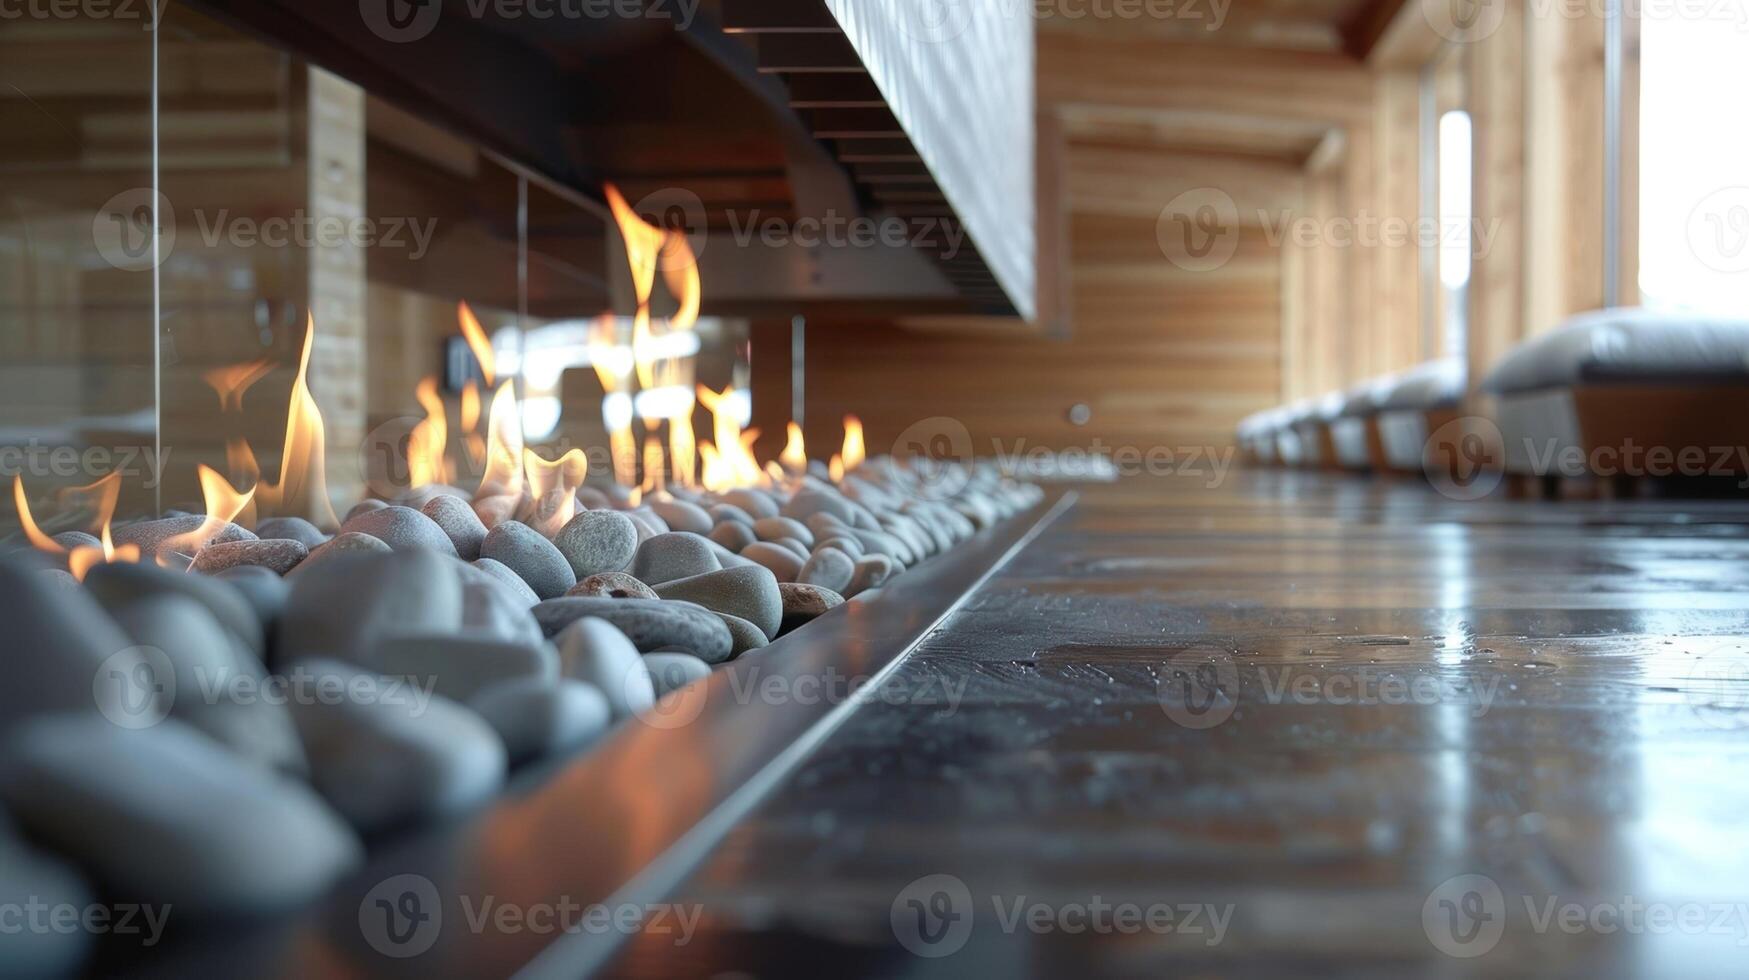 With the help of the reflective materials the fires warmth radiates throughout the entire room. 2d flat cartoon photo